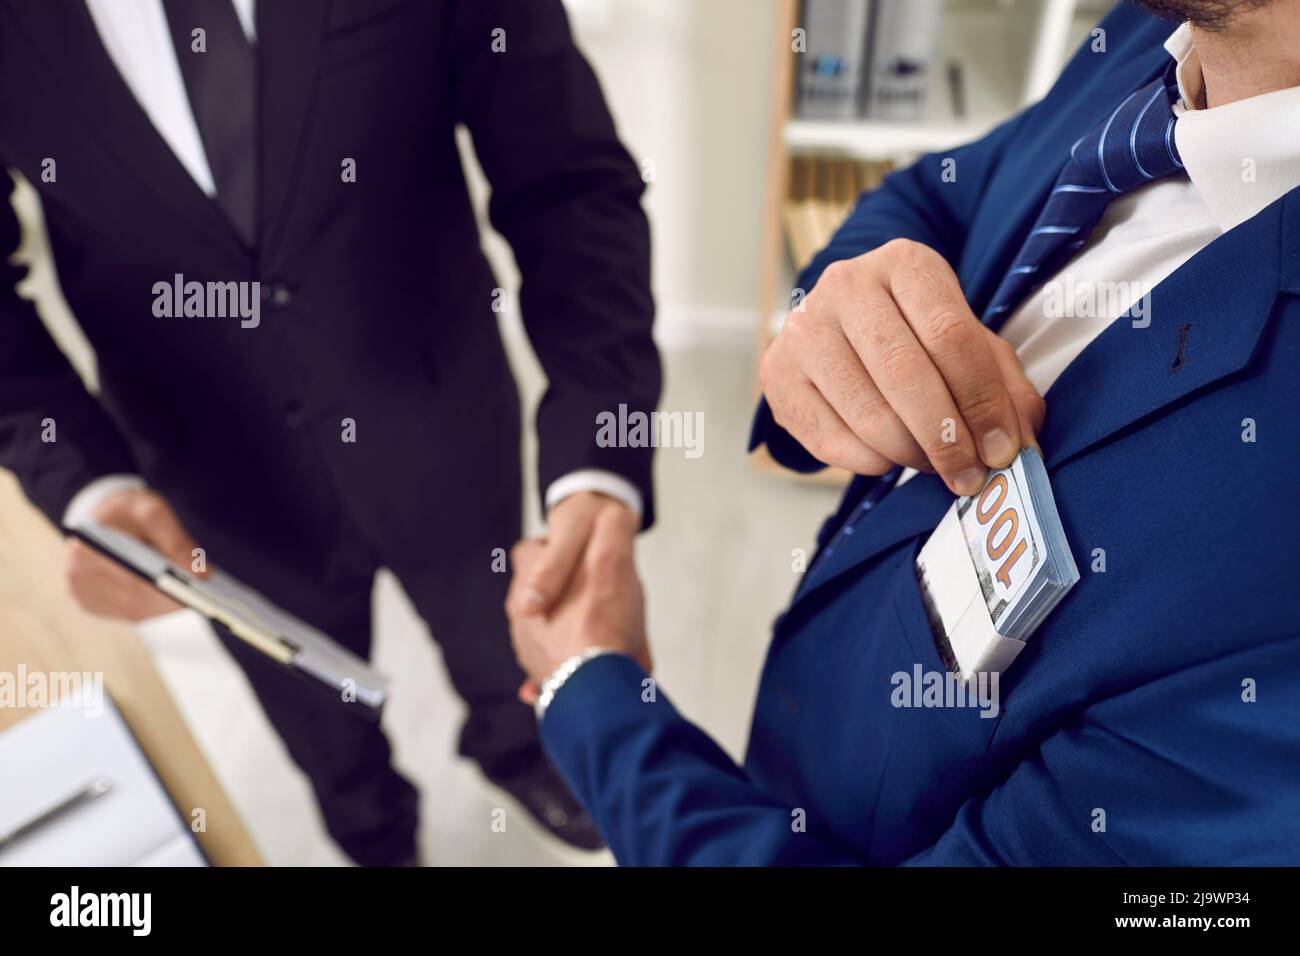 Business people cooperate, make money deal, sign agreement, and exchange handshakes Stock Photo